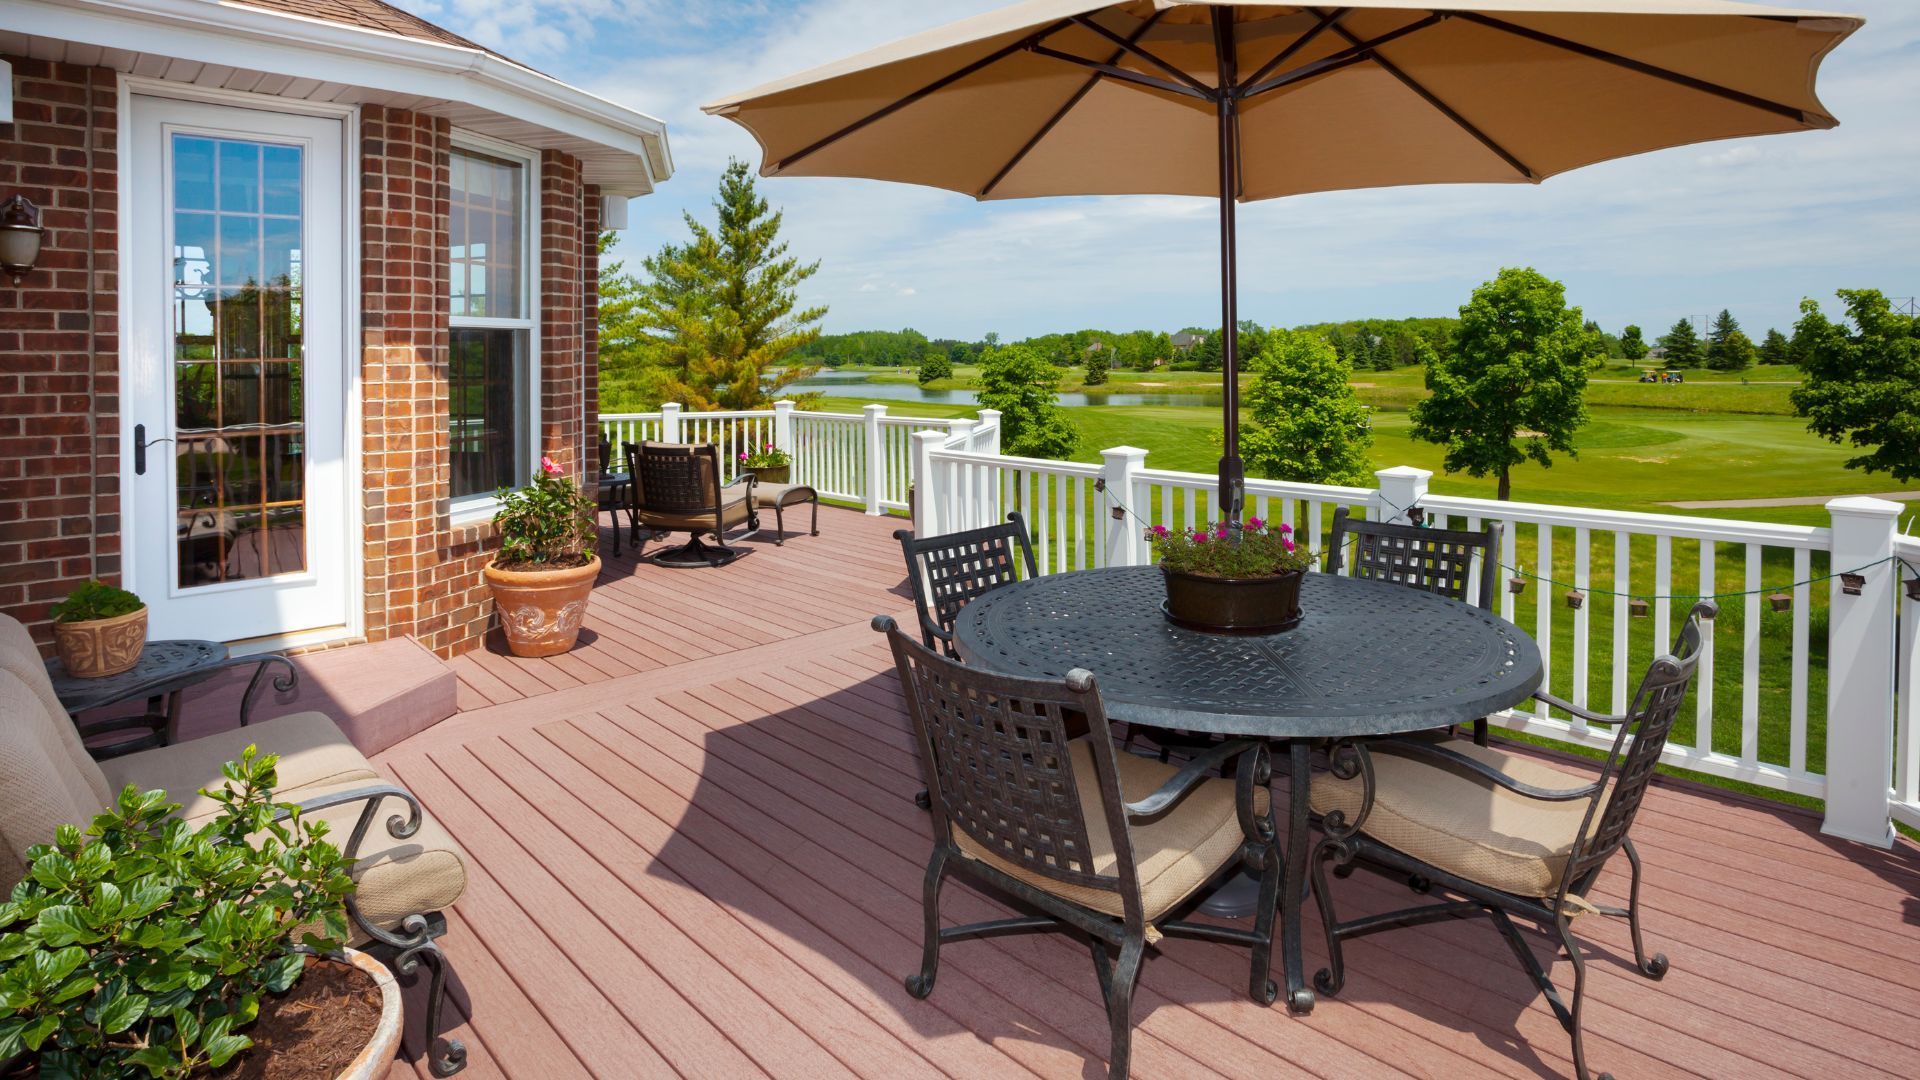 An idyllic and well-constructed deck in Athens, Georgia, featuring comfortable outdoor furniture and a large umbrella for shade, with a scenic view of a lush golf course in the background. The deck, built with composite materials, promises durability and easy maintenance, and the white railing offers a crisp contrast to the warm deck flooring. Potted plants add a touch of greenery, complementing the natural beauty of the surrounding landscape. This tranquil setting is perfect for enjoying warm Georgia afternoons or hosting social gatherings.